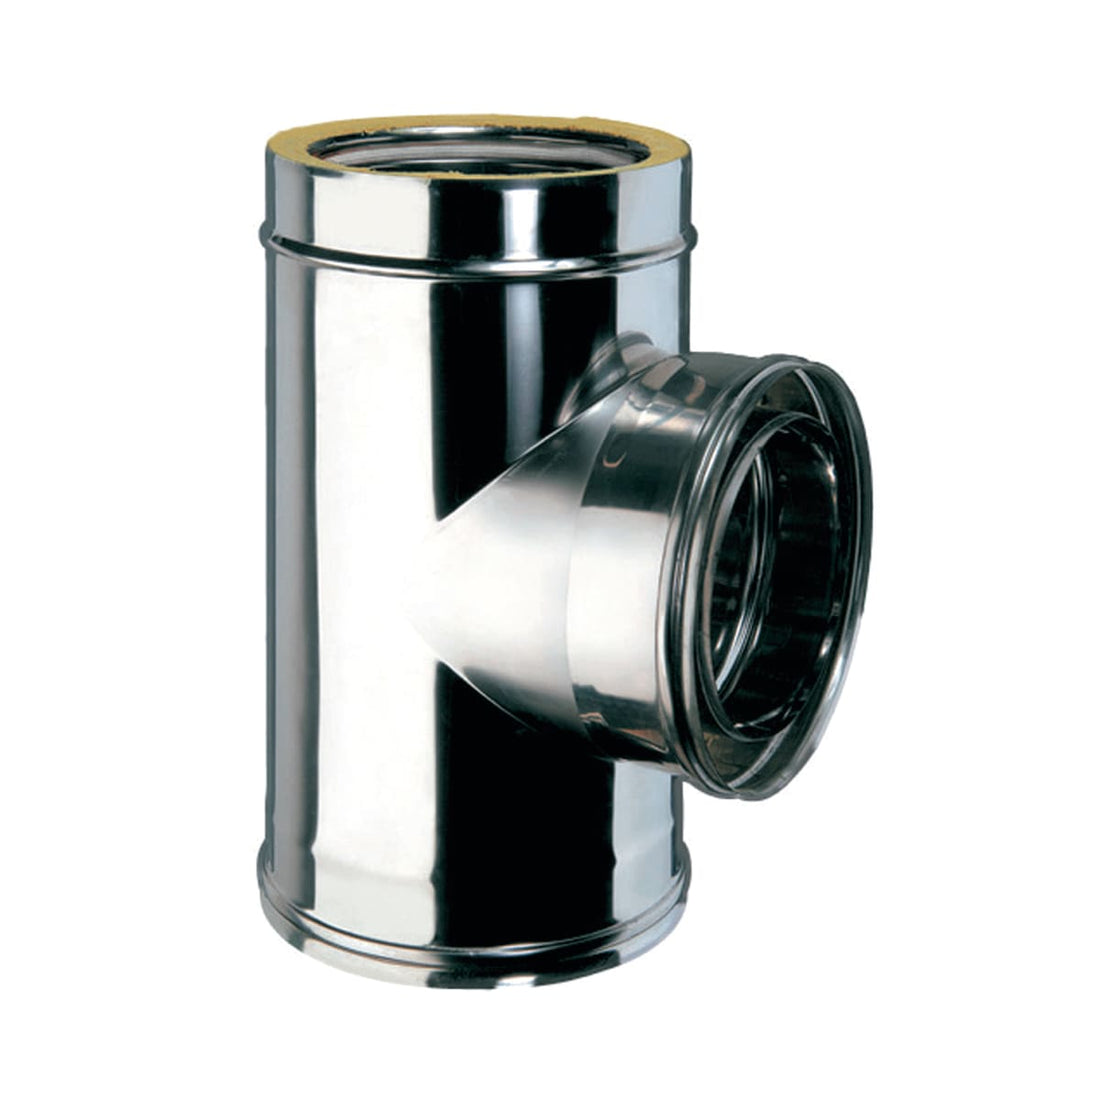 INSULATED STAINLESS STEEL T-FITTING DIA 80 MM